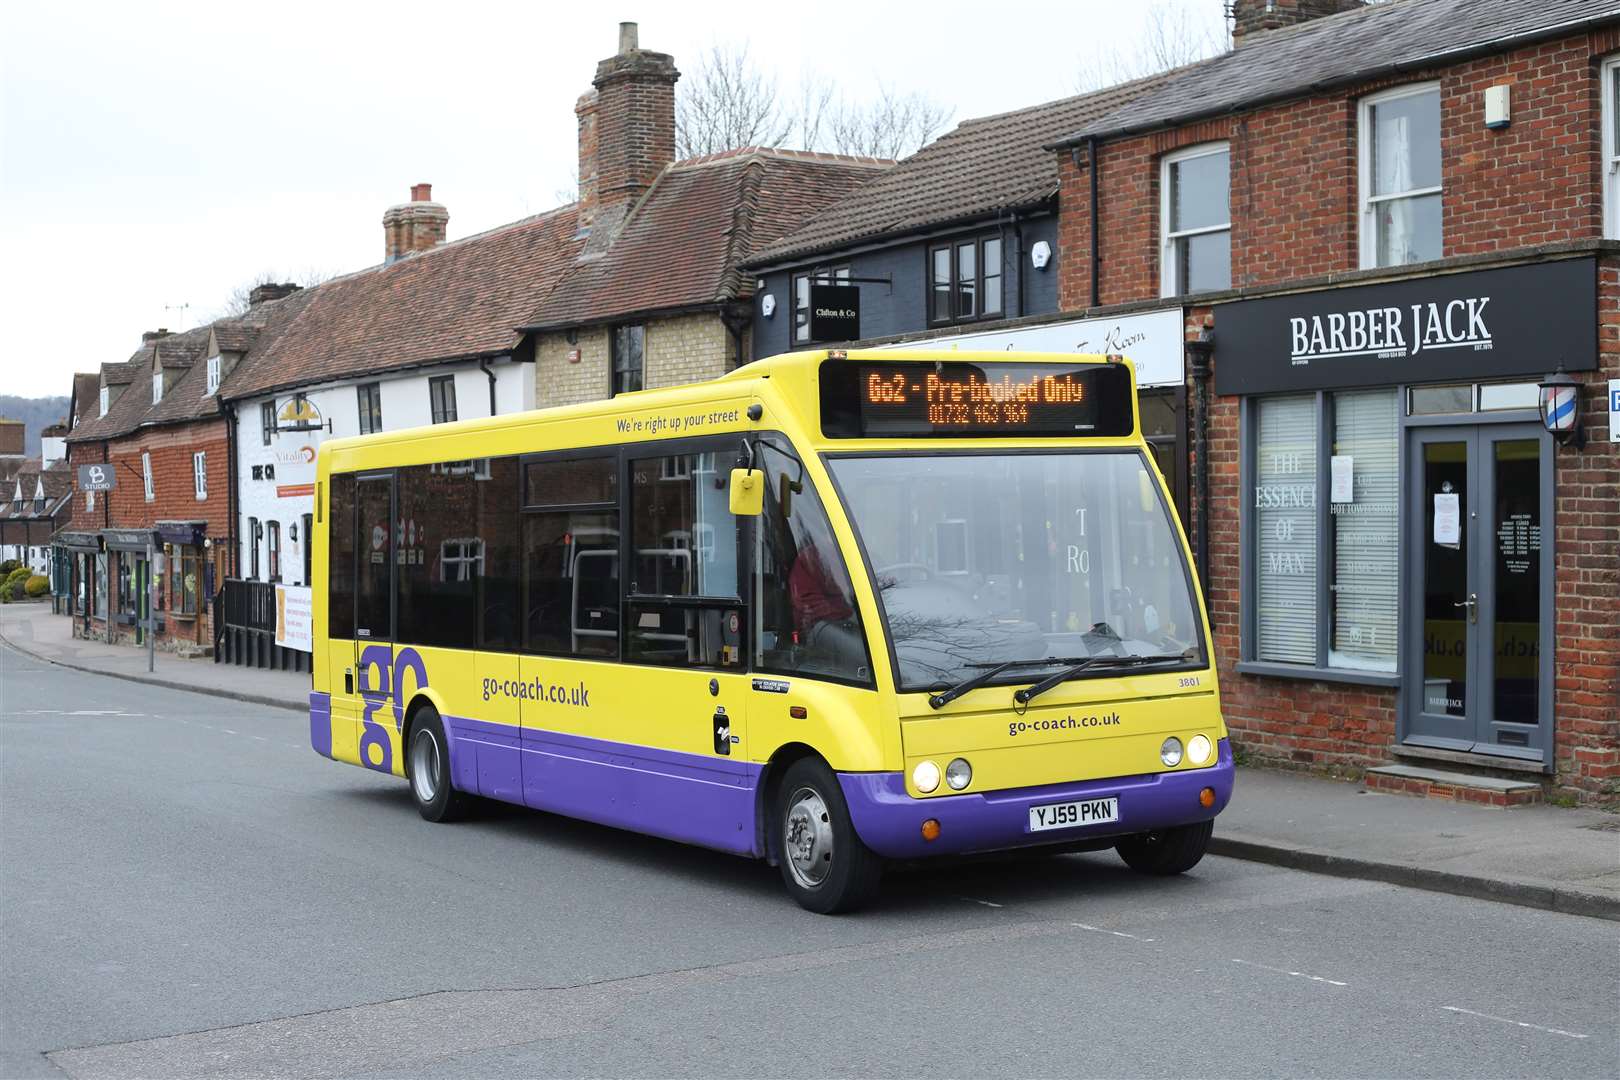 Some Sevenoaks bus routes have been temporarily replaced by a new on-demand service